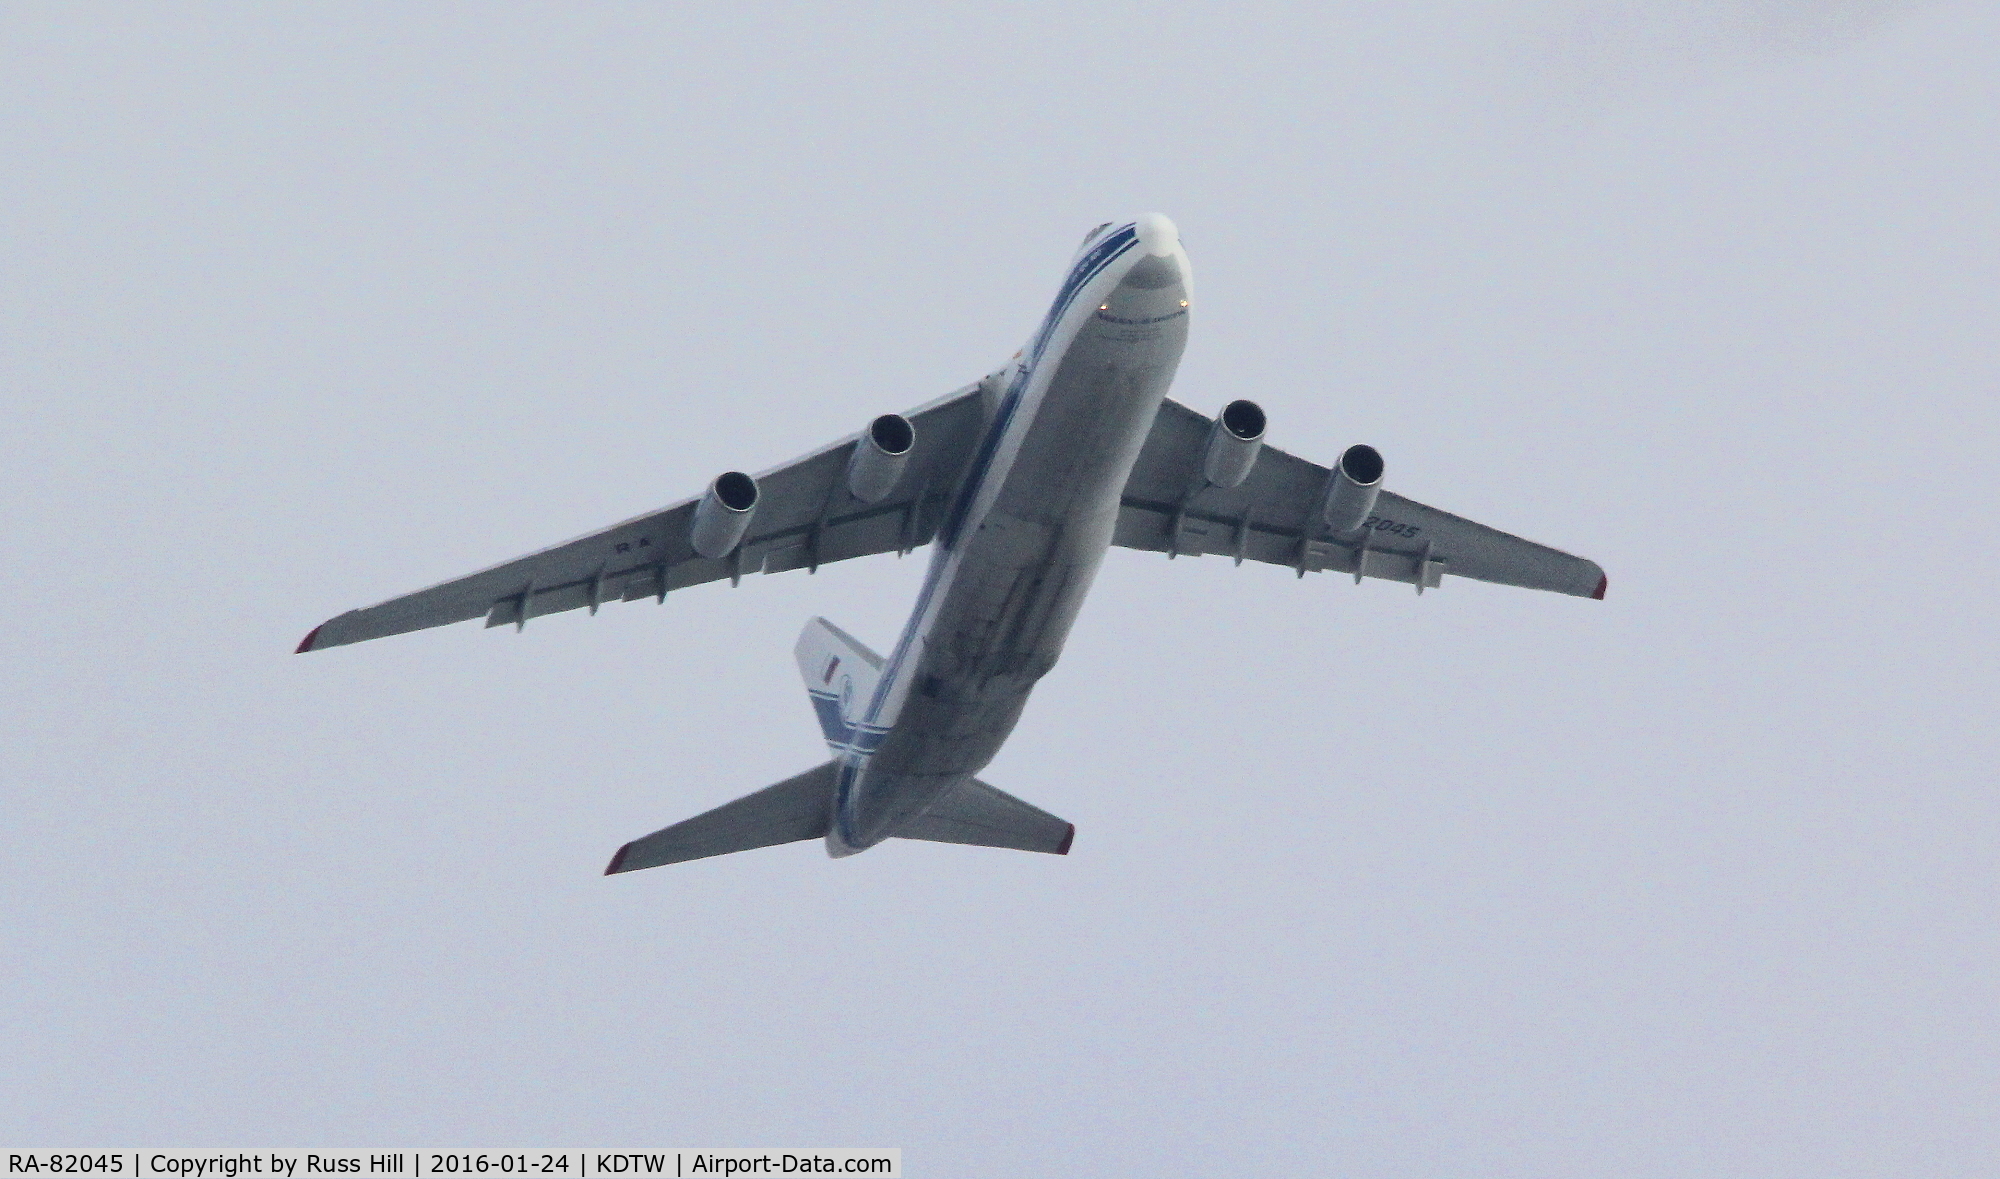 RA-82045, 1991 Antonov An-124-100 Ruslan C/N 9773052255113, On approach to DTW, approx 15 miles out.